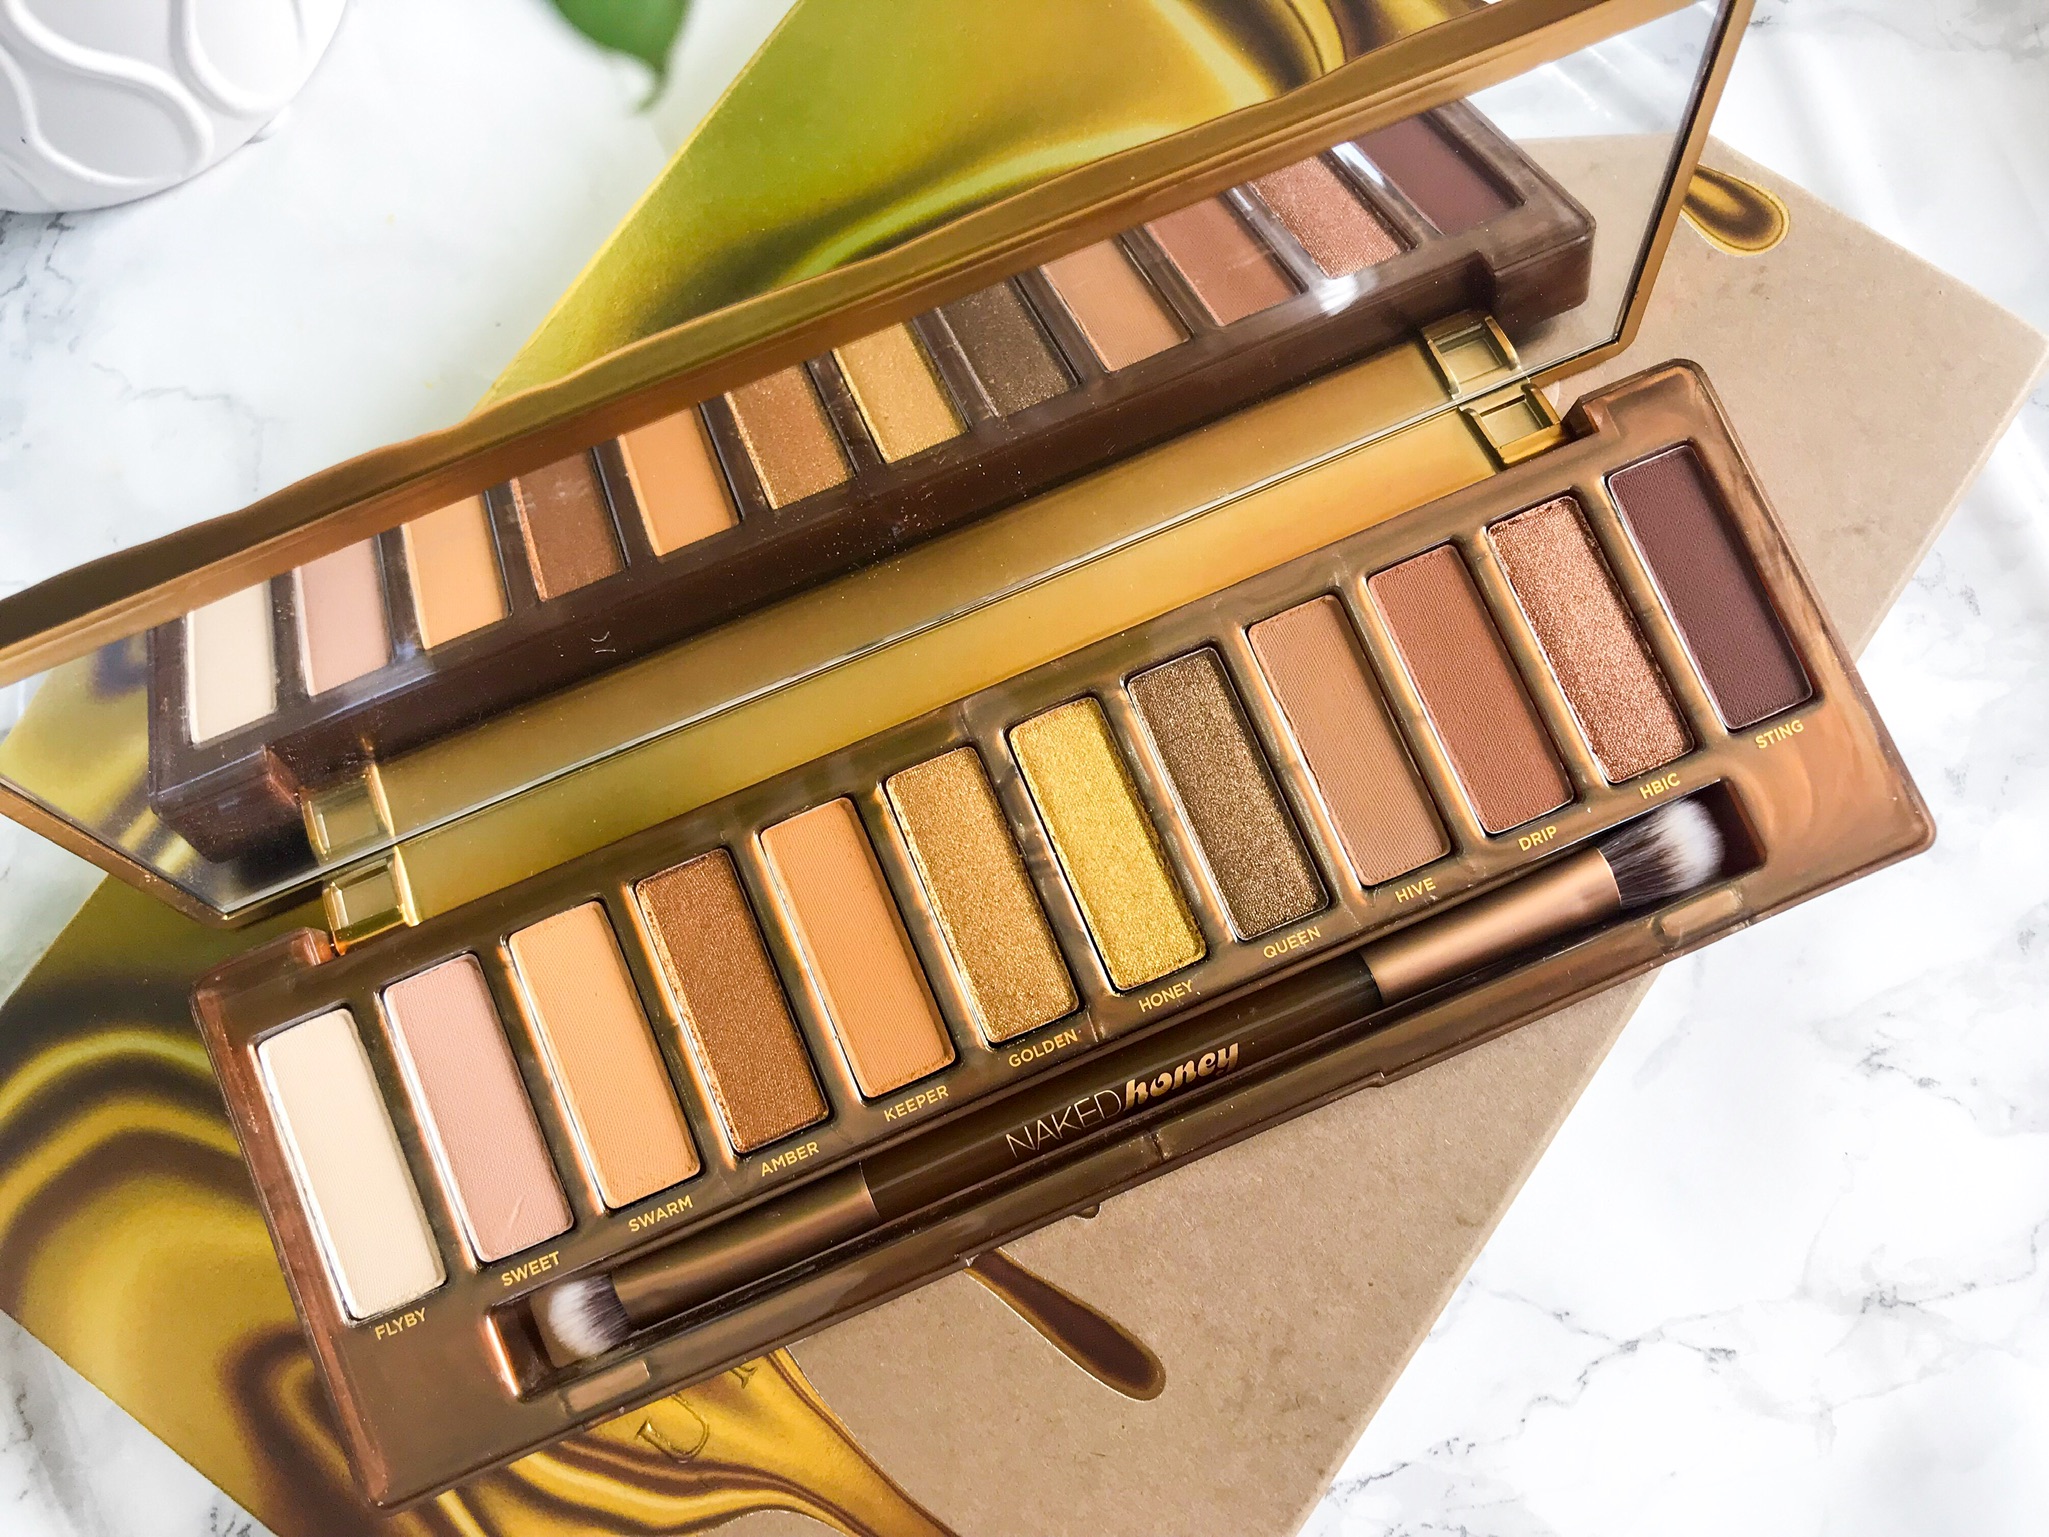 Urban Decay - Urban Decay Naked Eyeshadow Palette Review 